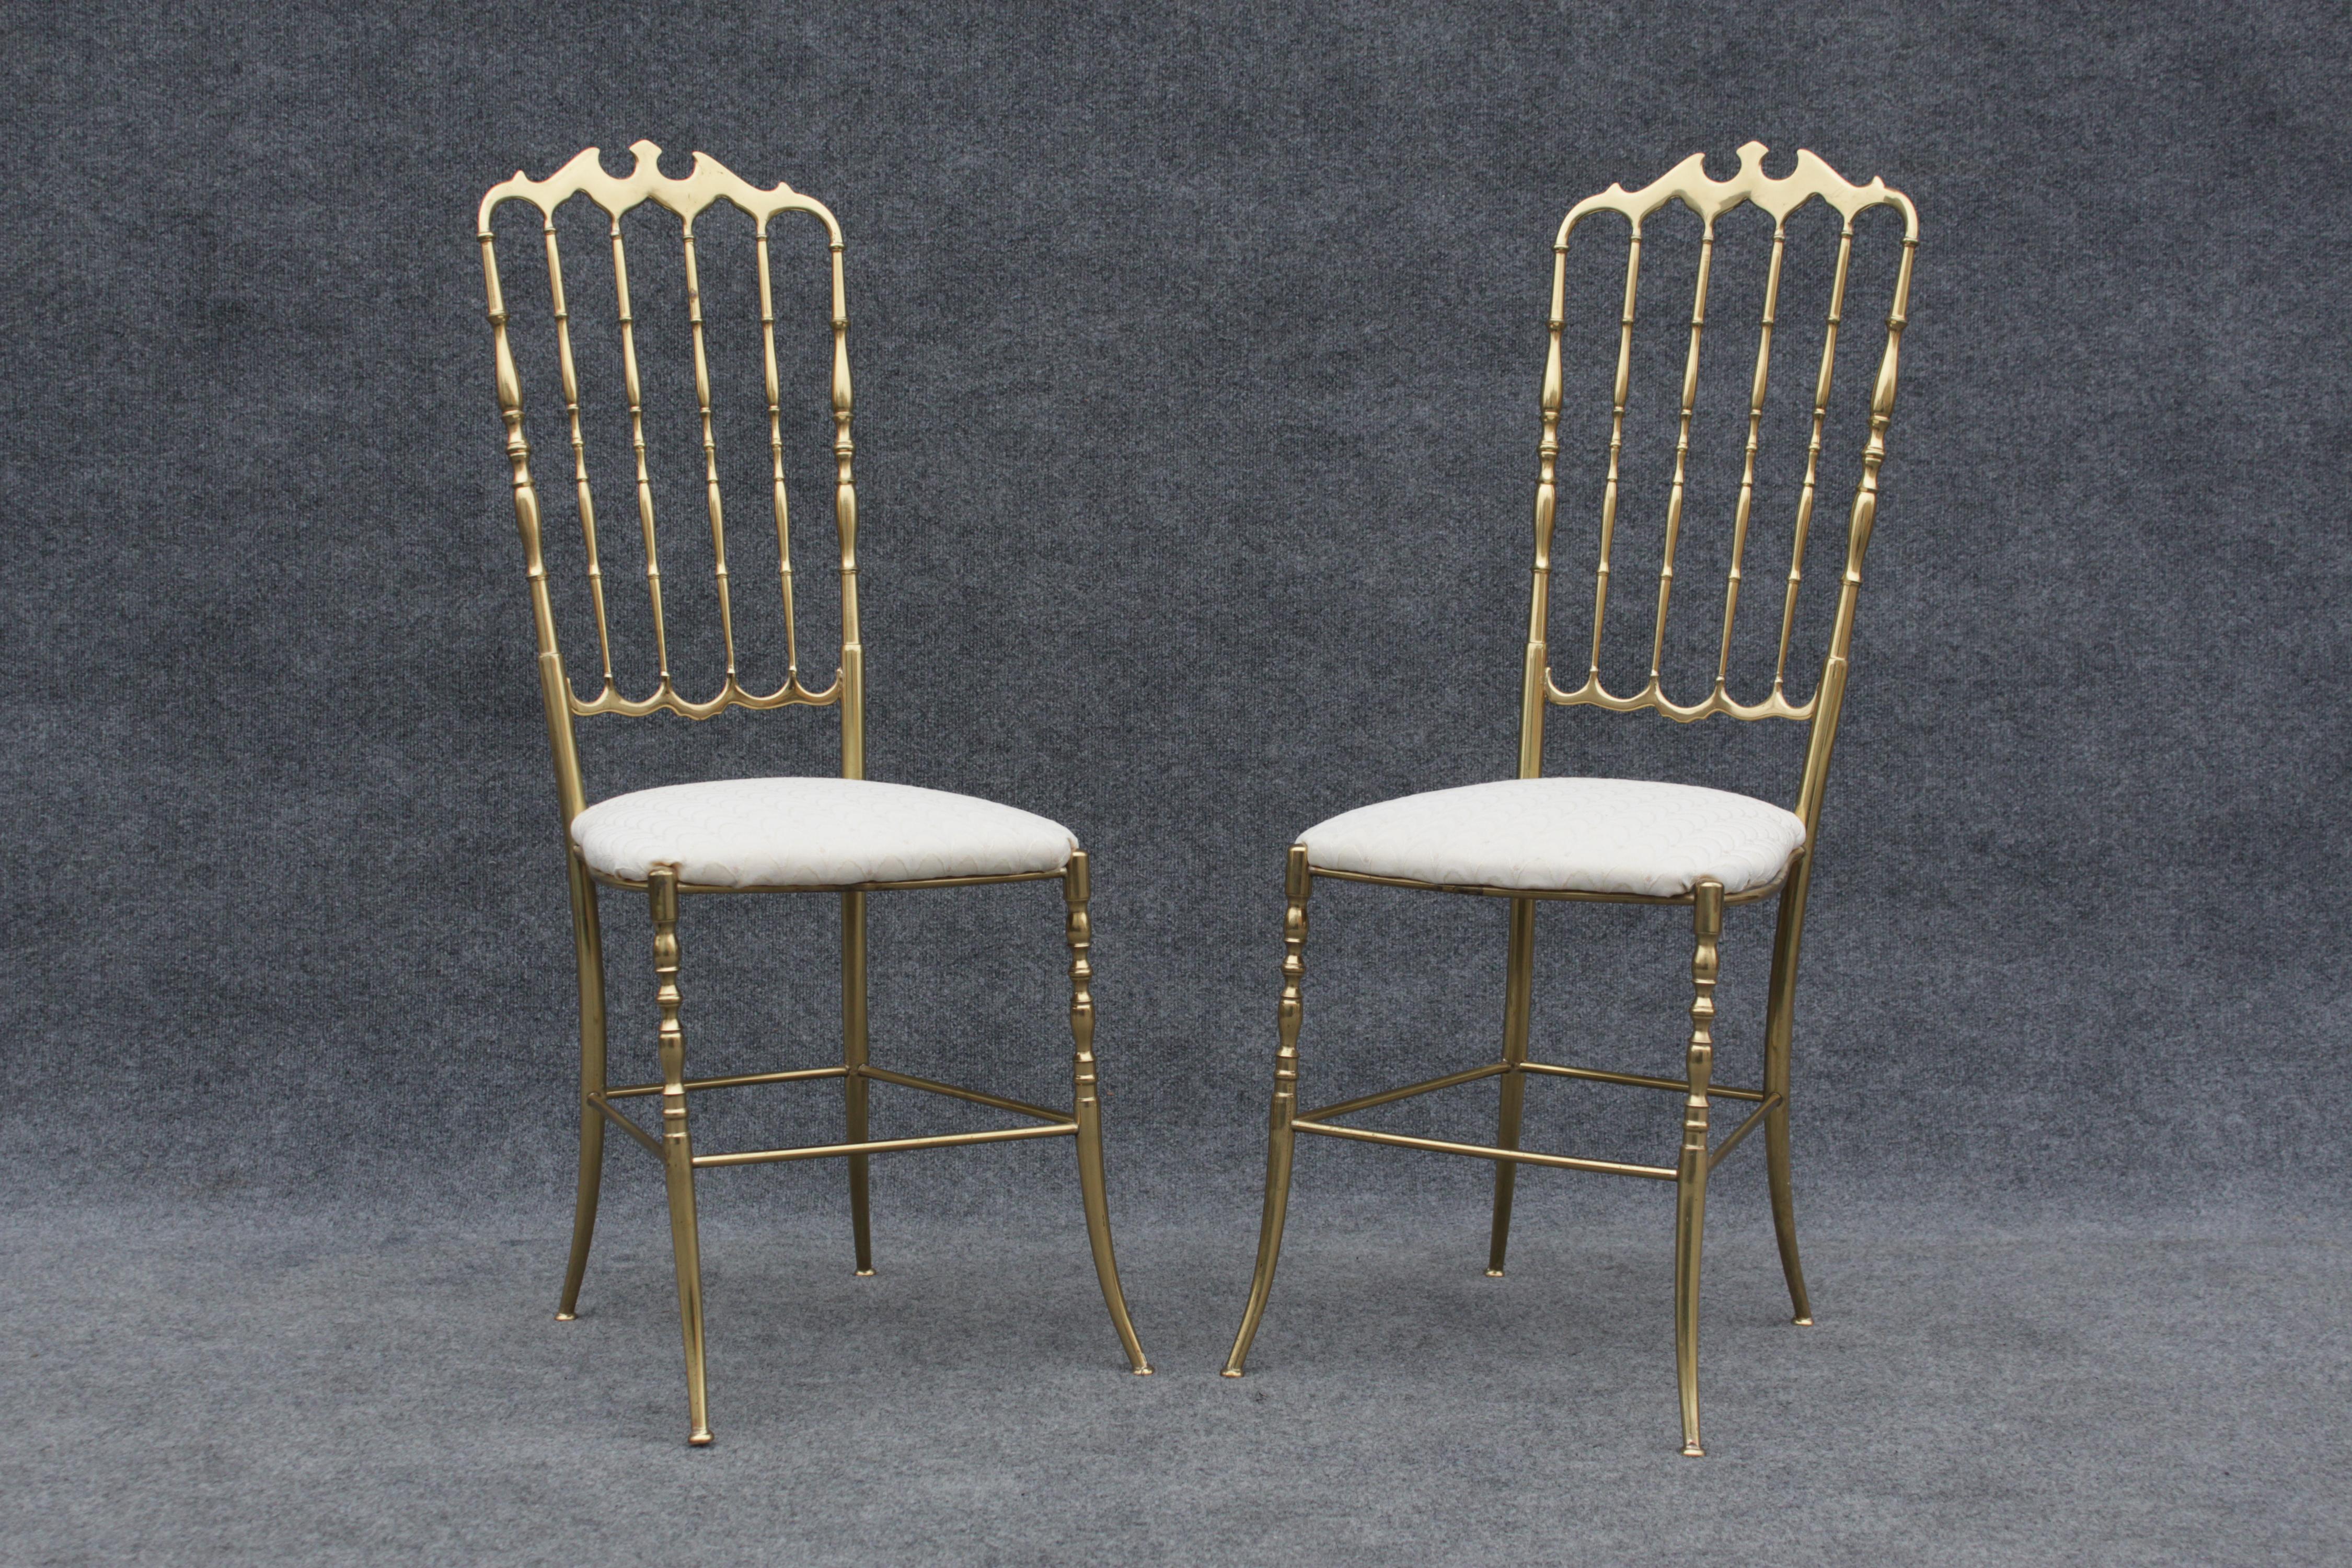 Pair of Solid Brass & White Upholstered Dining or Side Chairs by Chiavari Italy For Sale 2